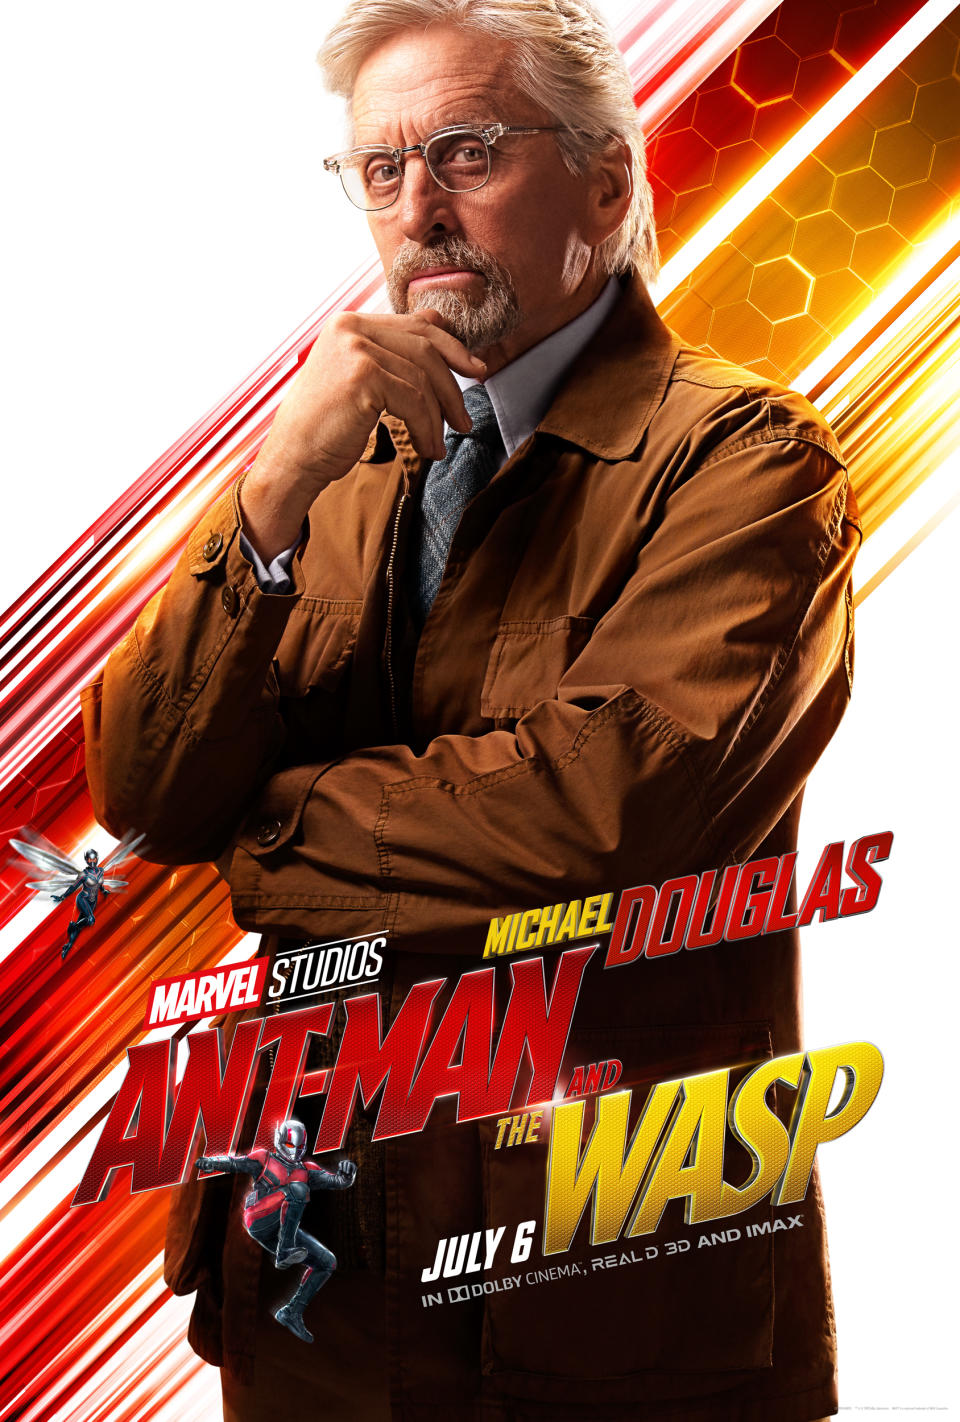 Michael Douglas in <i>Ant-Man and the Wasp</i>. (Image: Marvel)